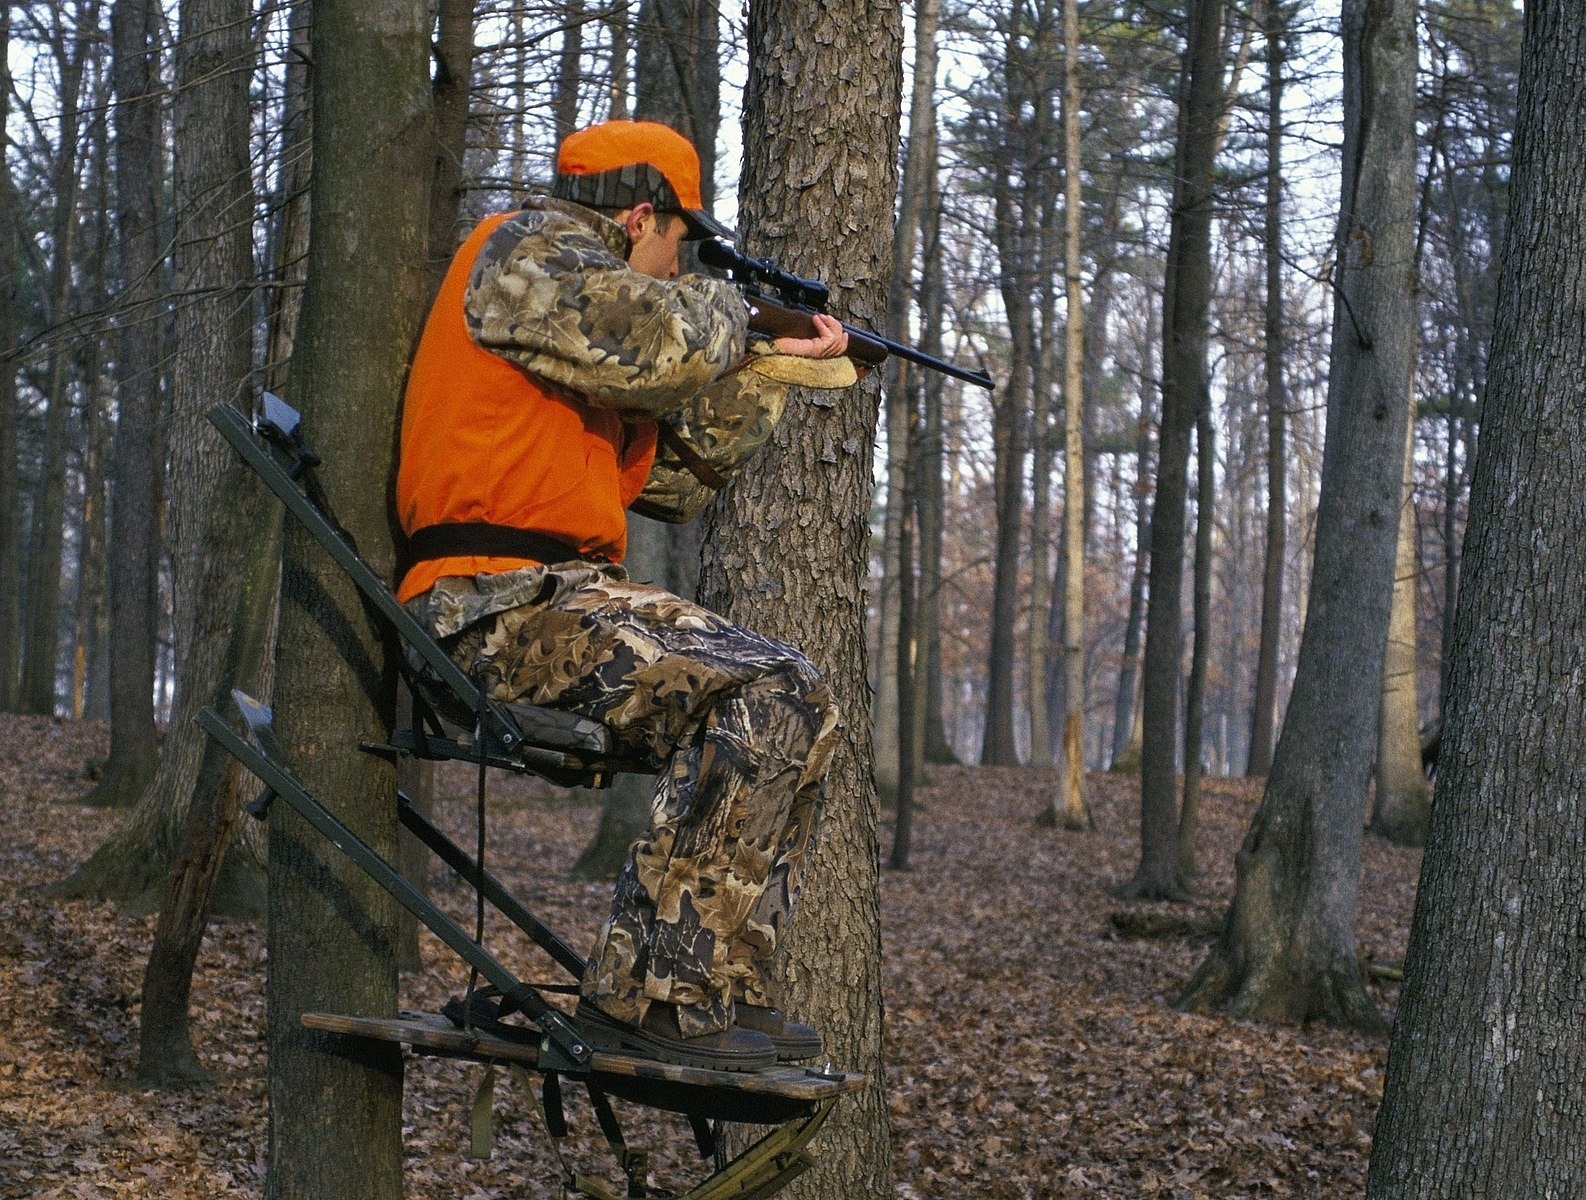 A hunter in the deer stand. Photo courtesy Steve Maslowski/US Fish and Wildlife Service